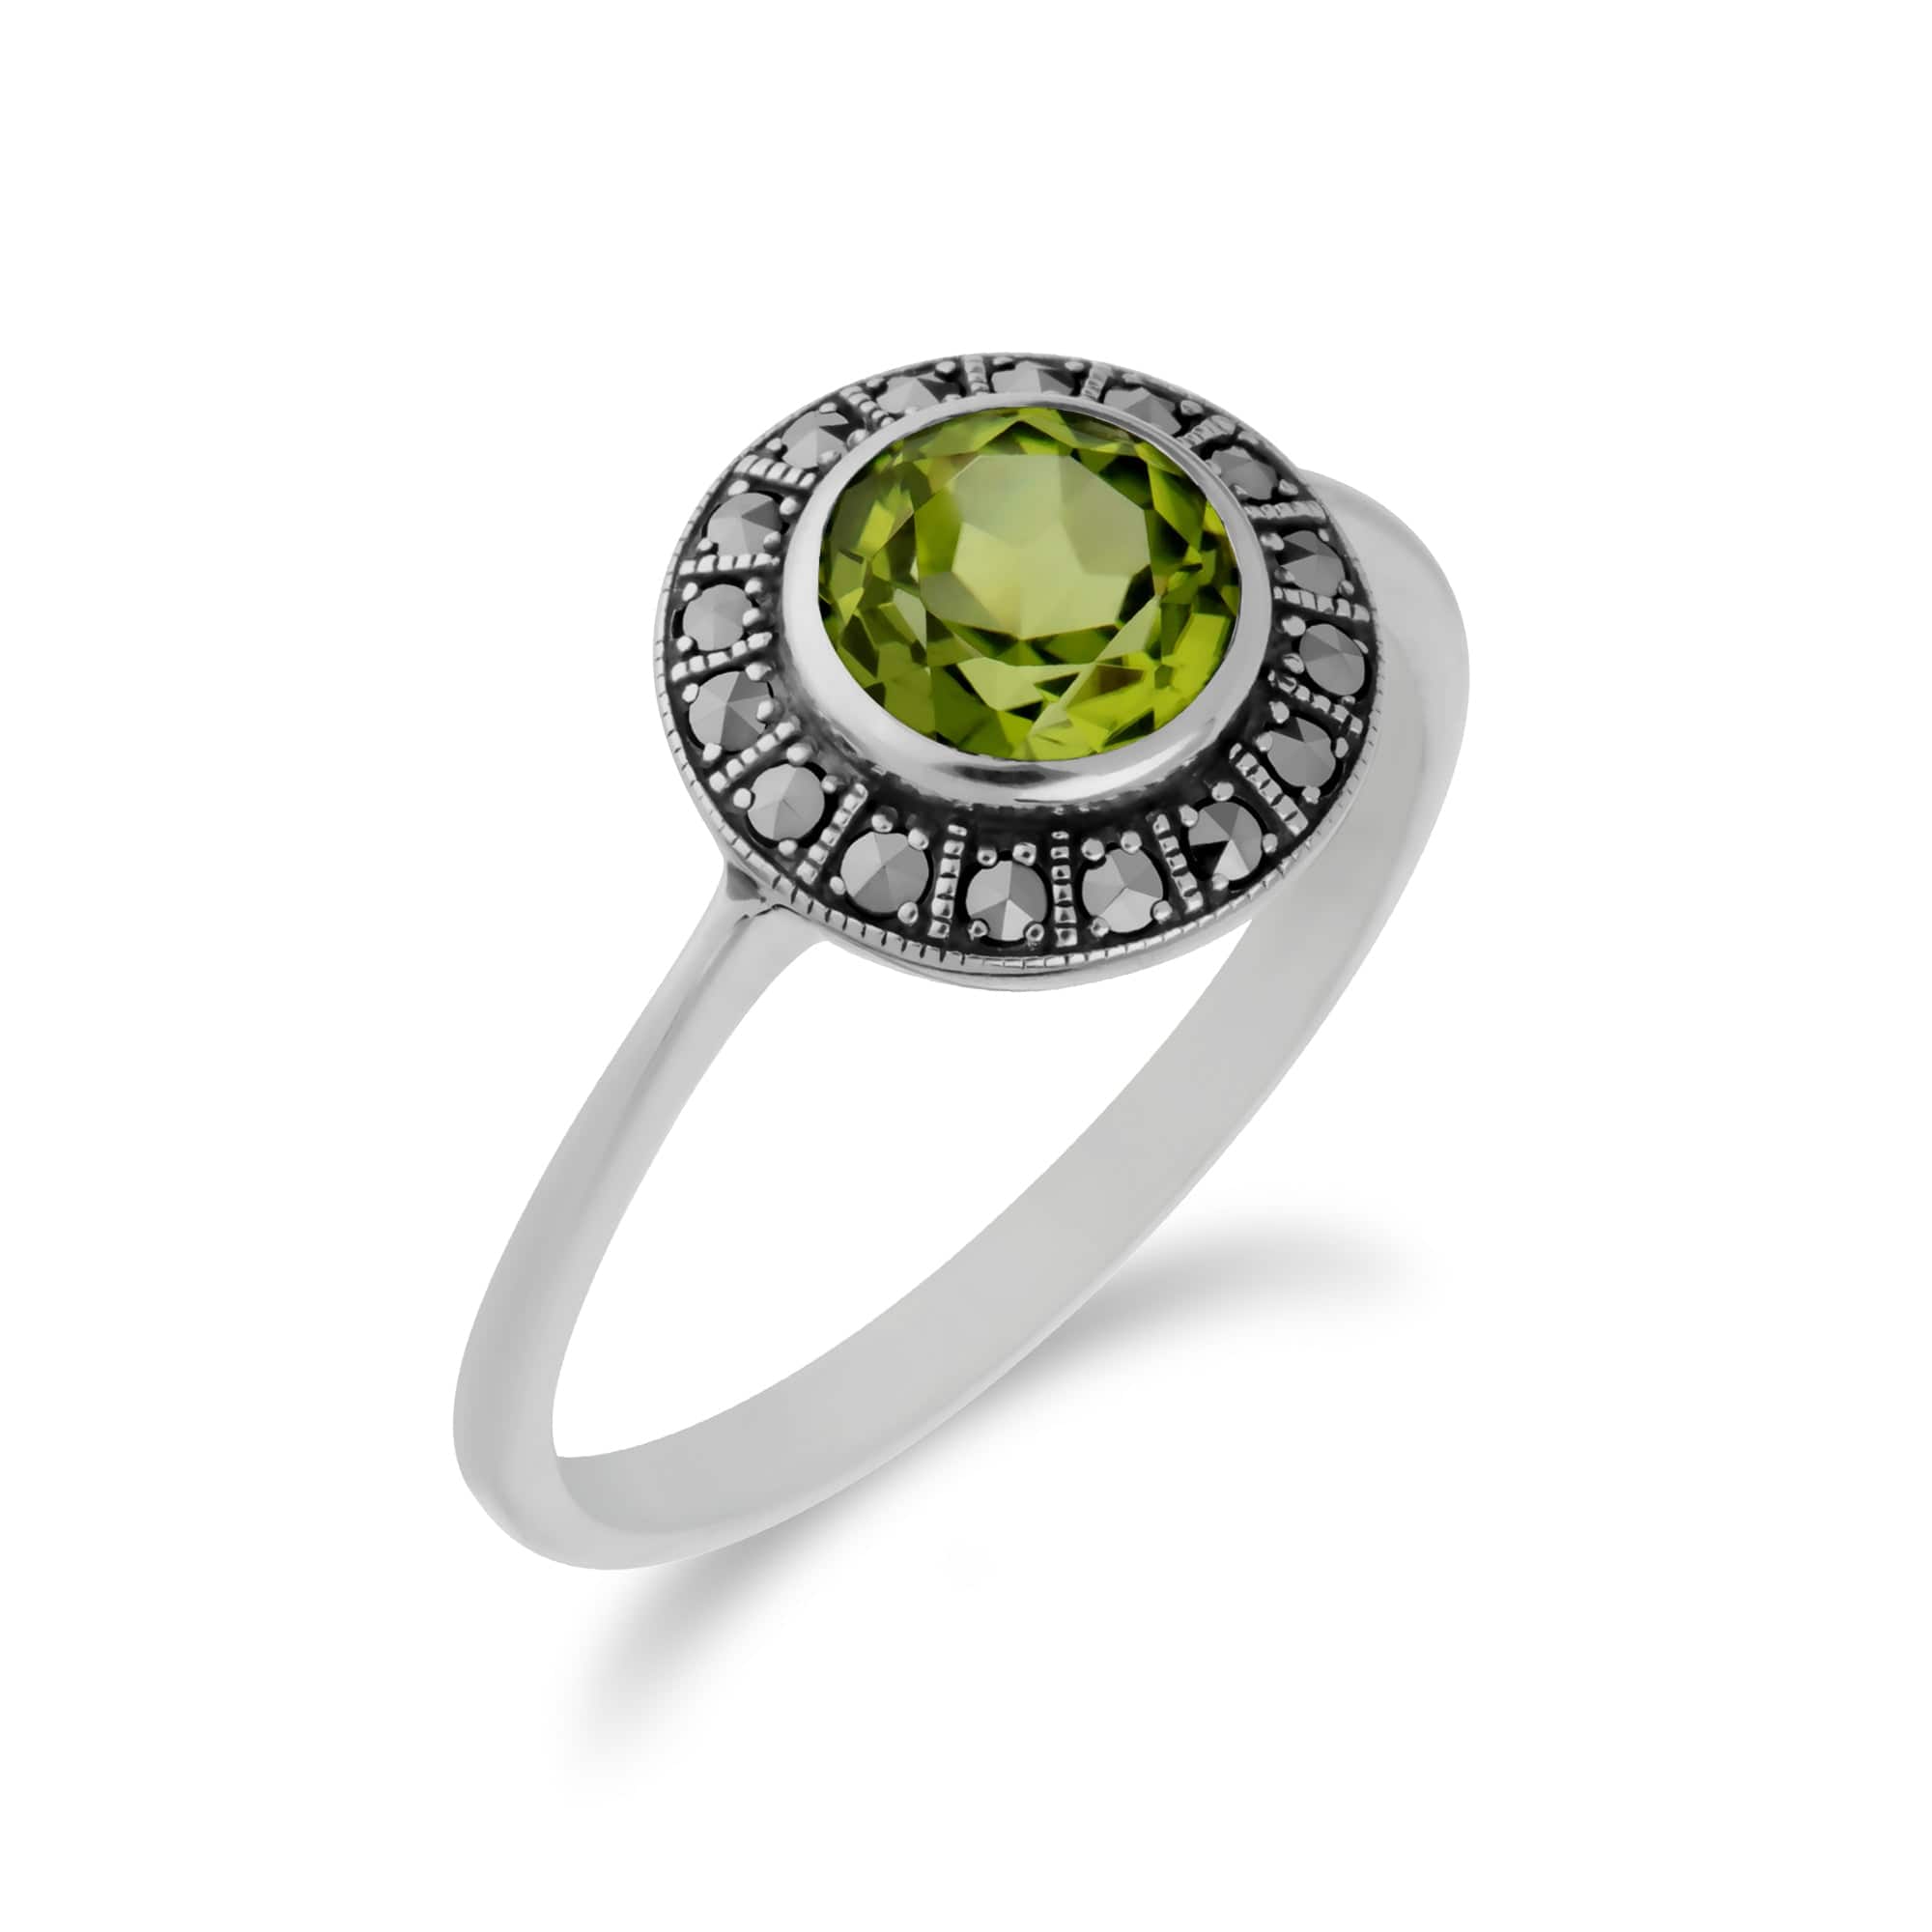 214R605604925 Art Deco Style Round Peridot & Marcasite Halo Ring in 925 Sterling Silver 2